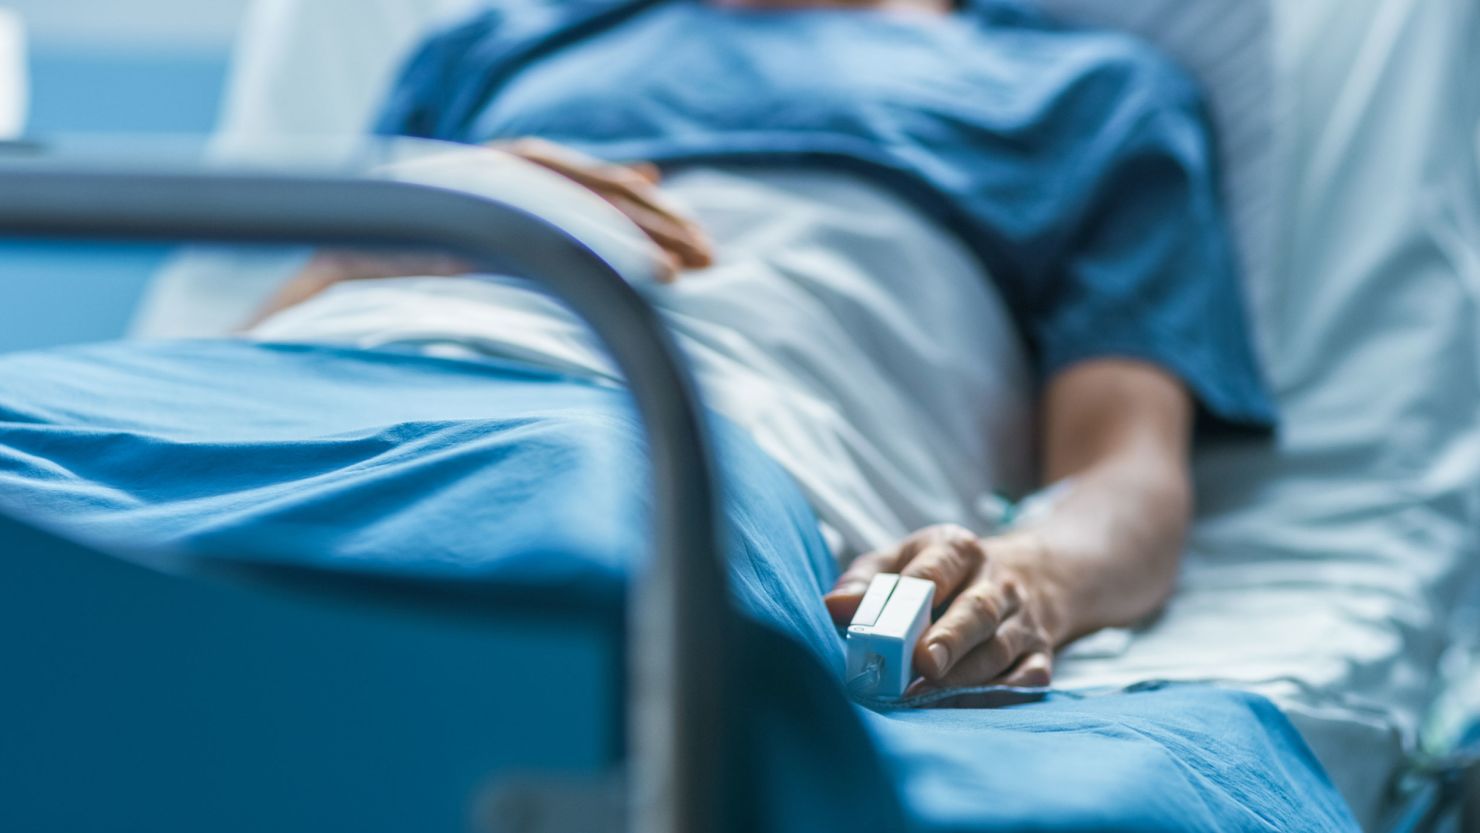 Hundreds of Americans Are Hospitalized After Eating Pieces of Wire